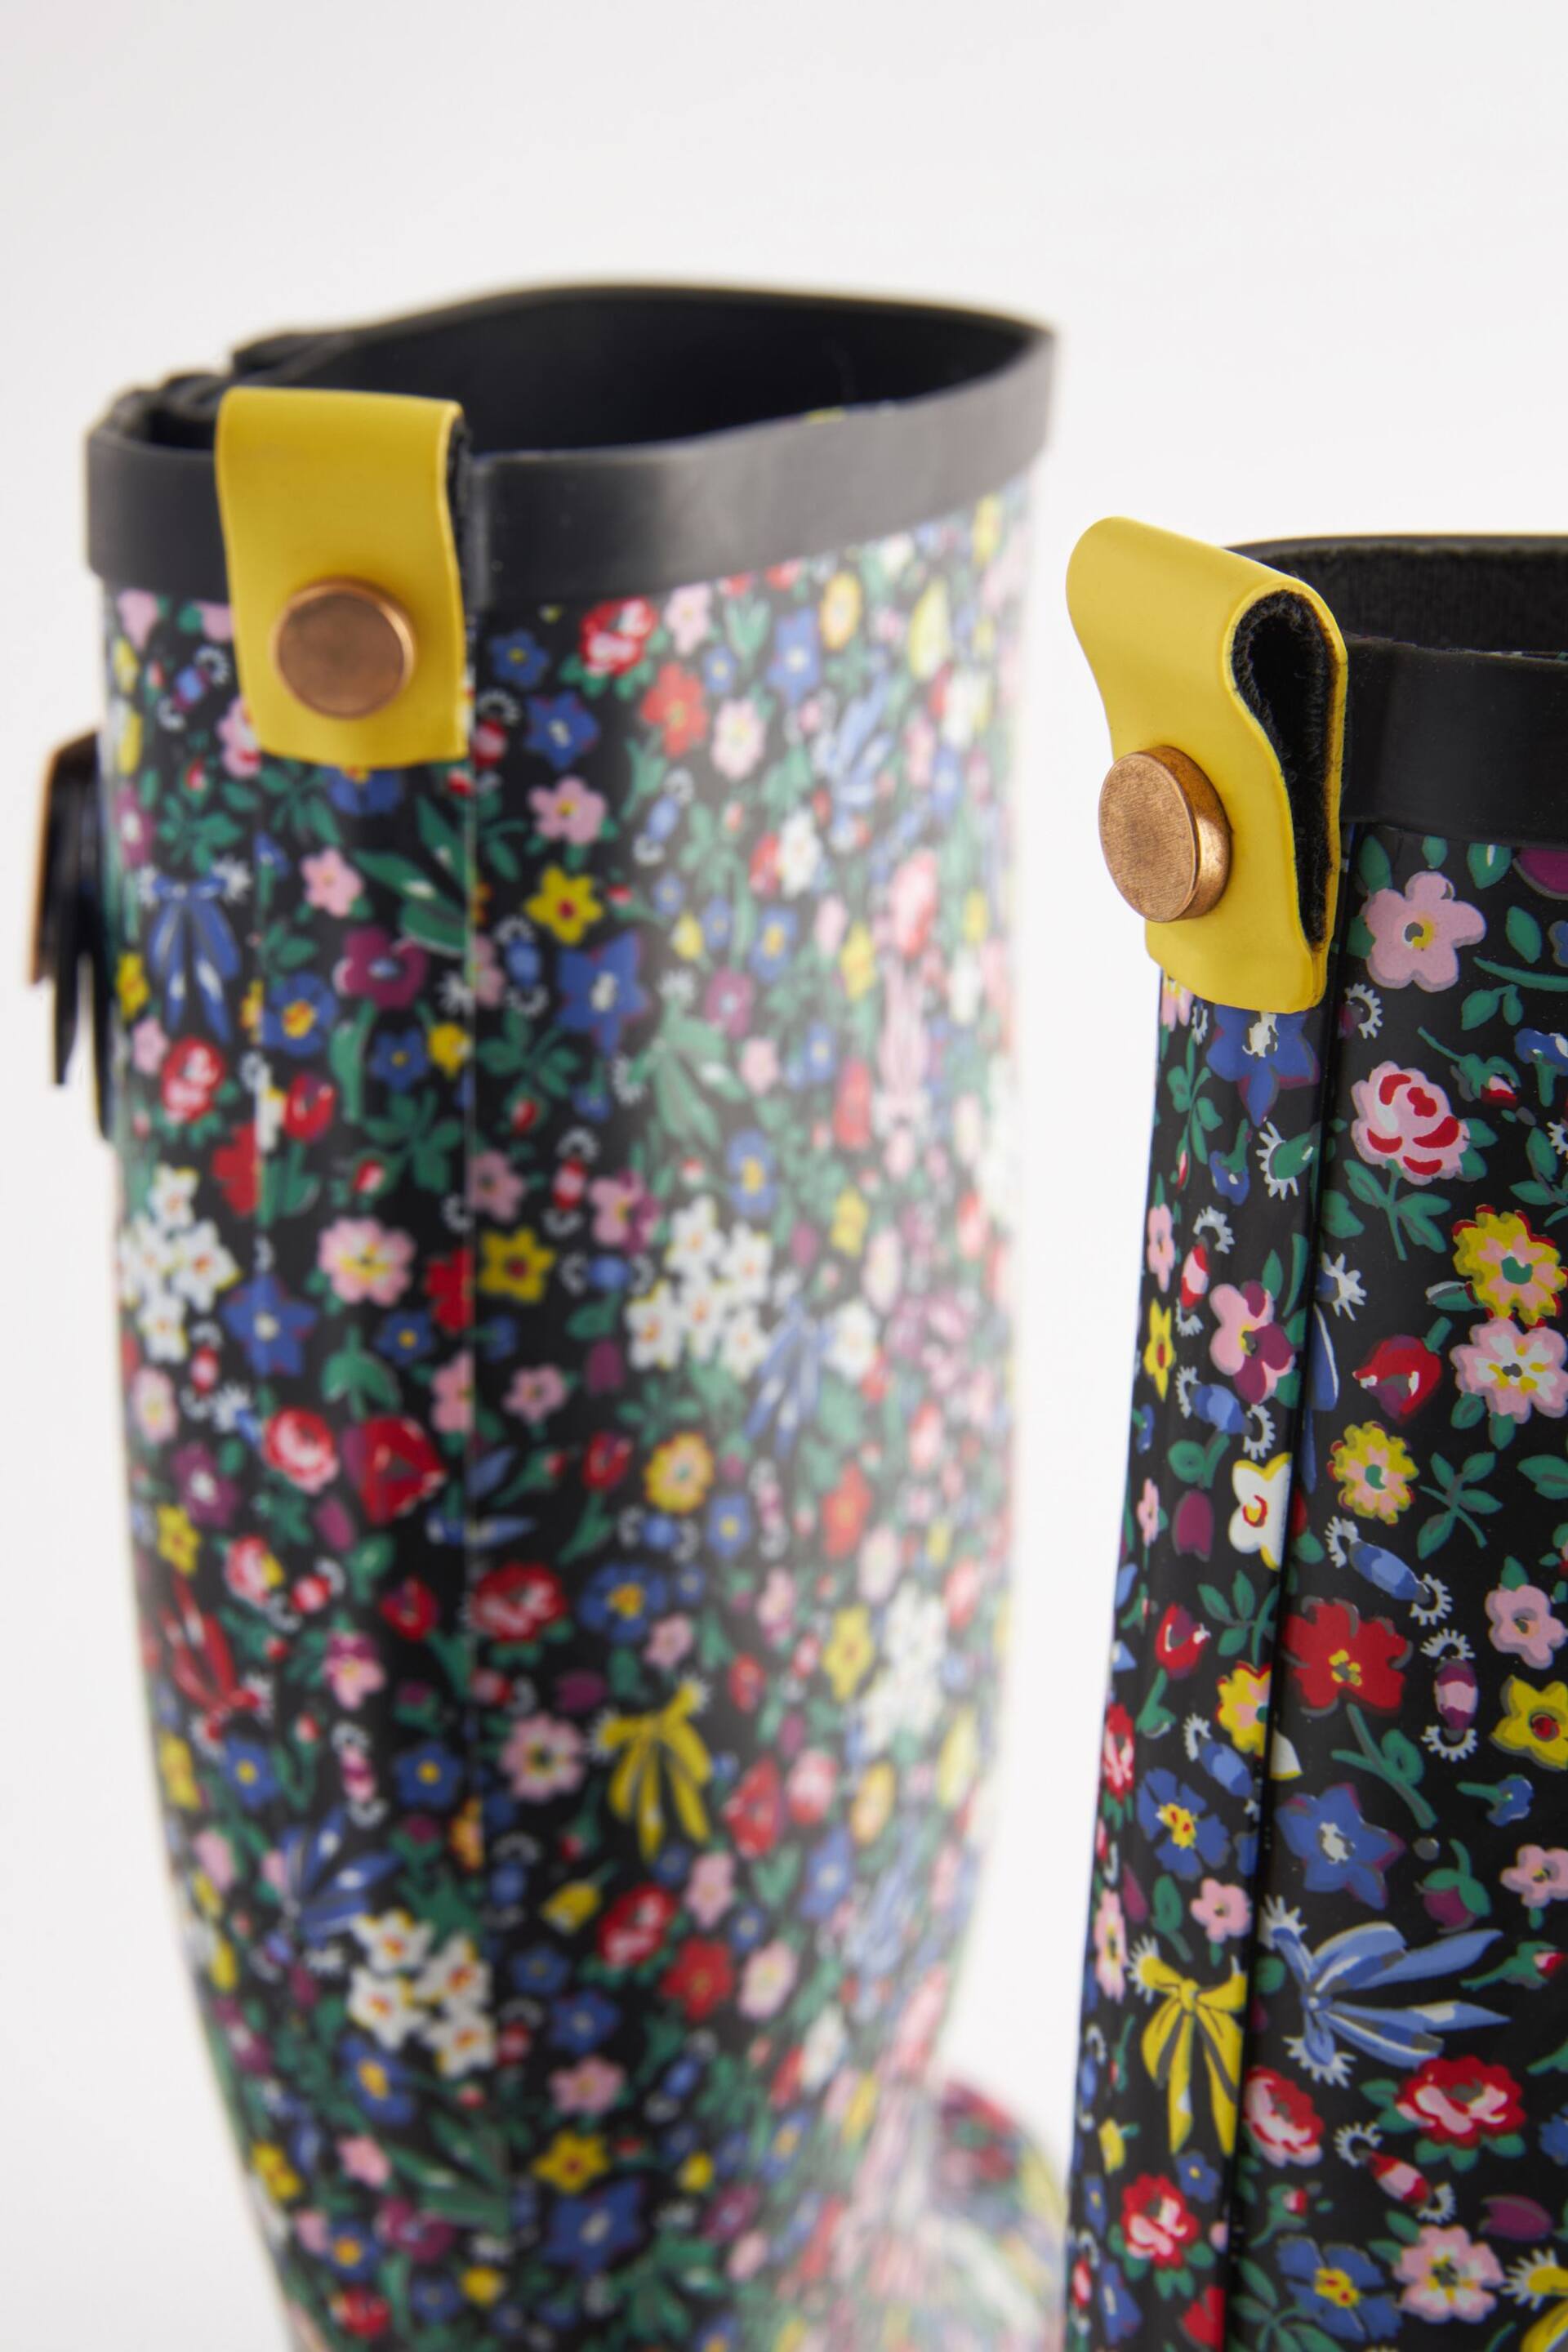 Cath Kidston Black Ditsy Floral Tall Wellies - Image 5 of 7